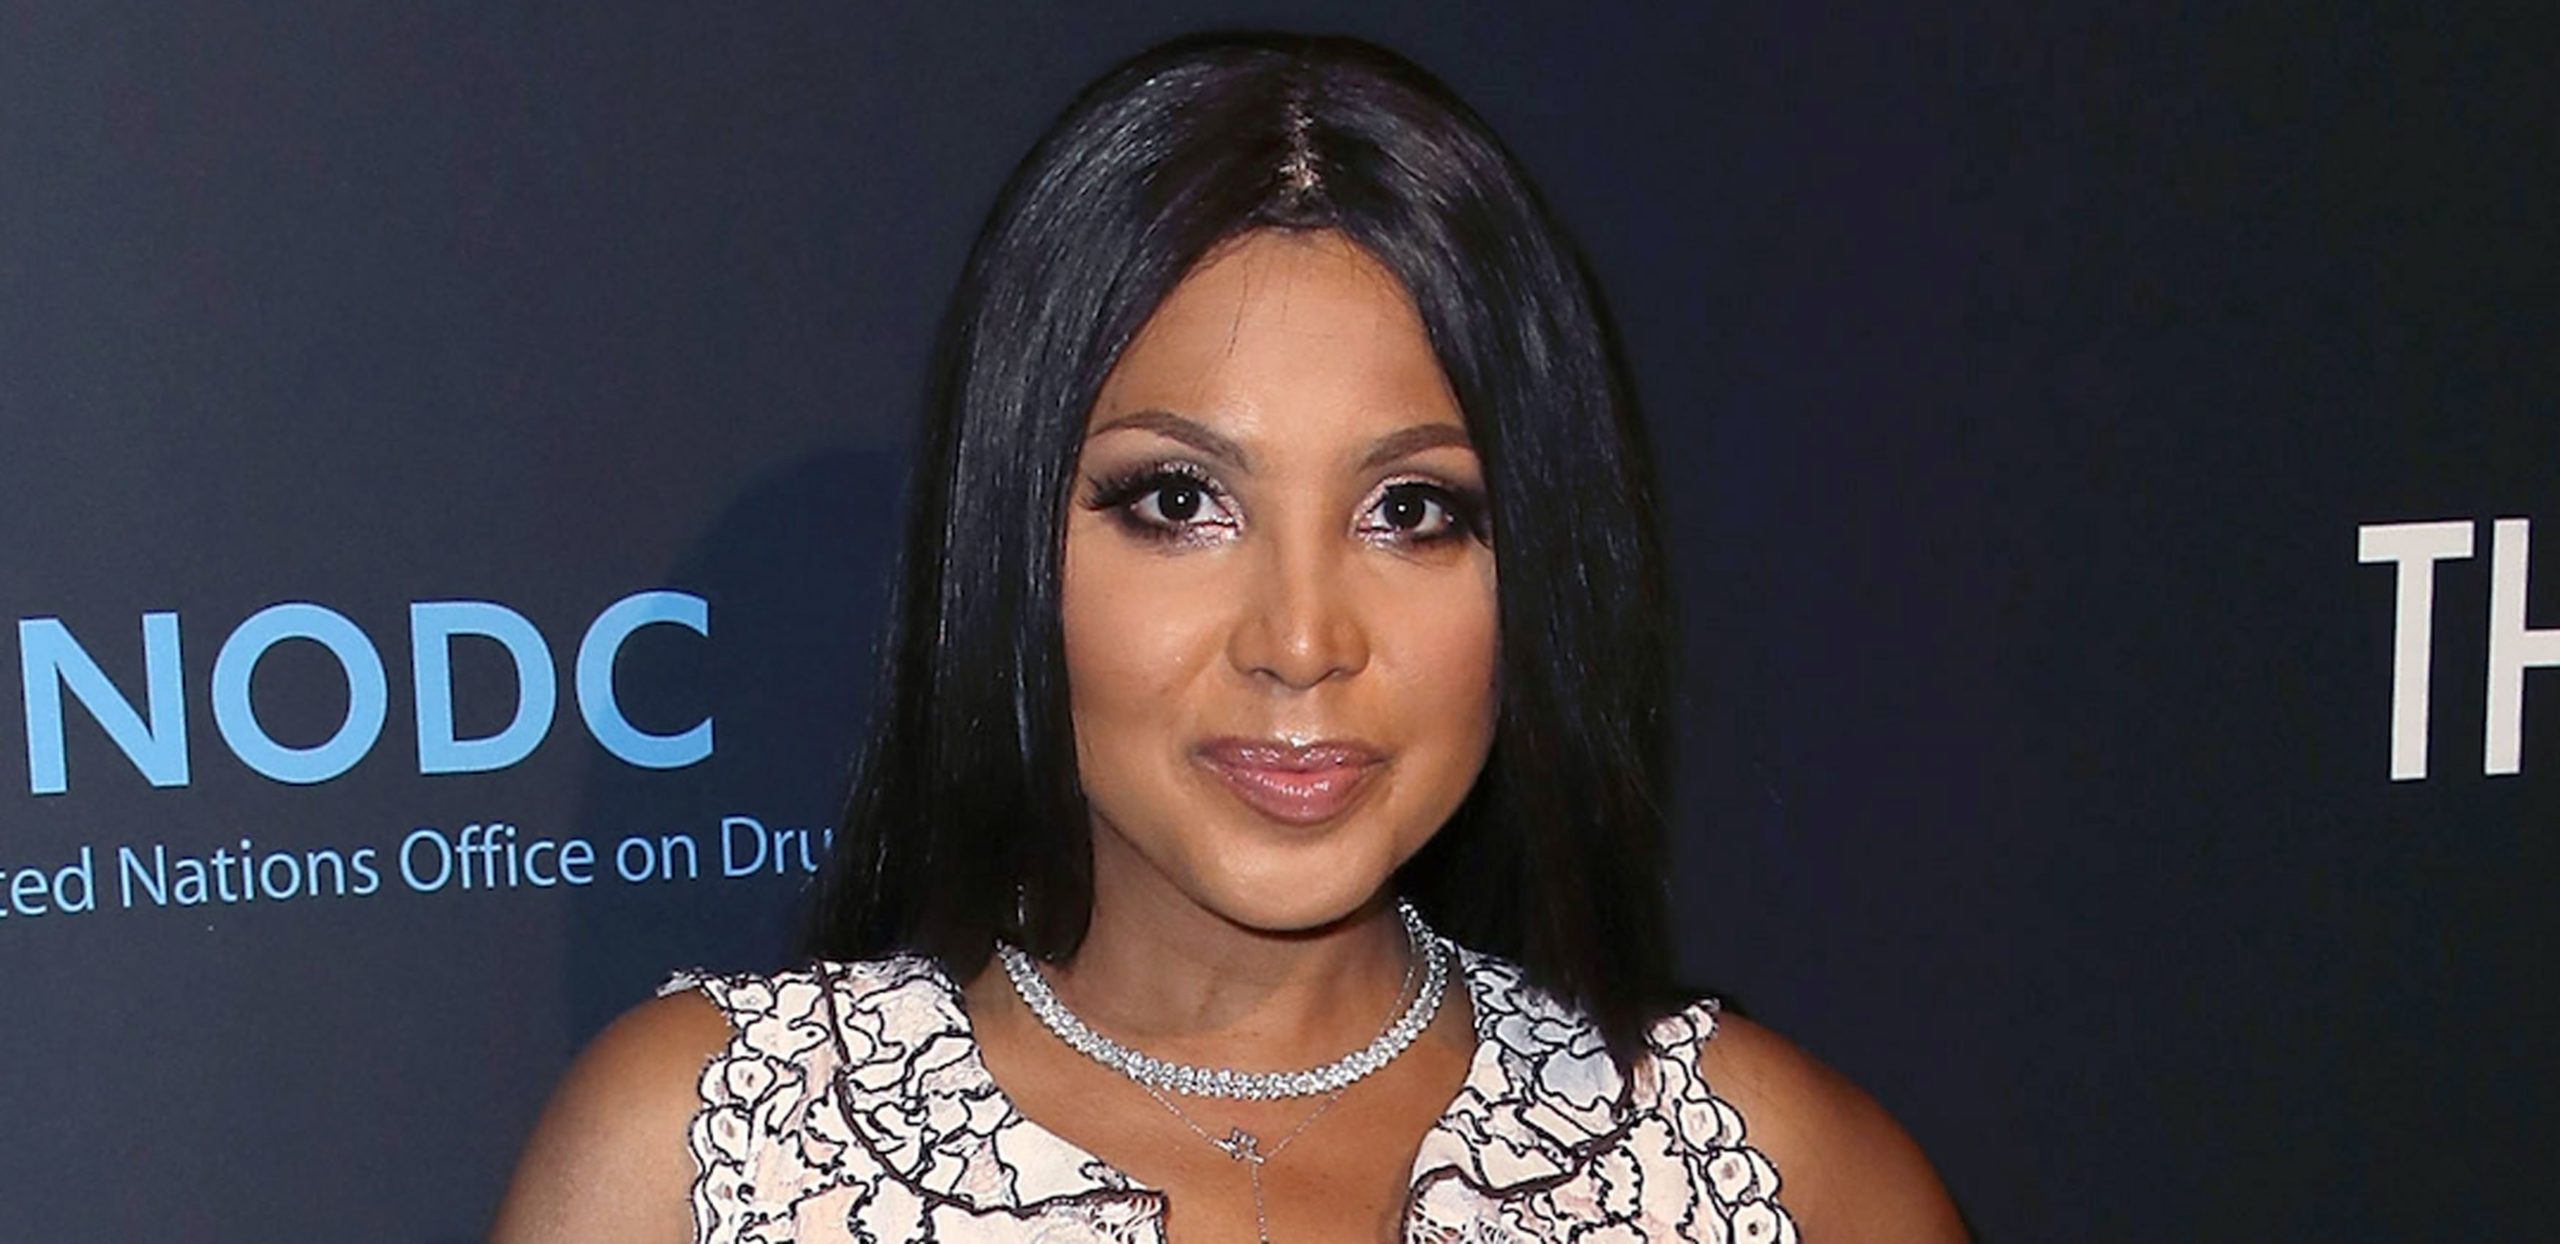 Toni Braxton Reveals She Uses a Trojan Vibrator to Massage Her Face — Watch the Video